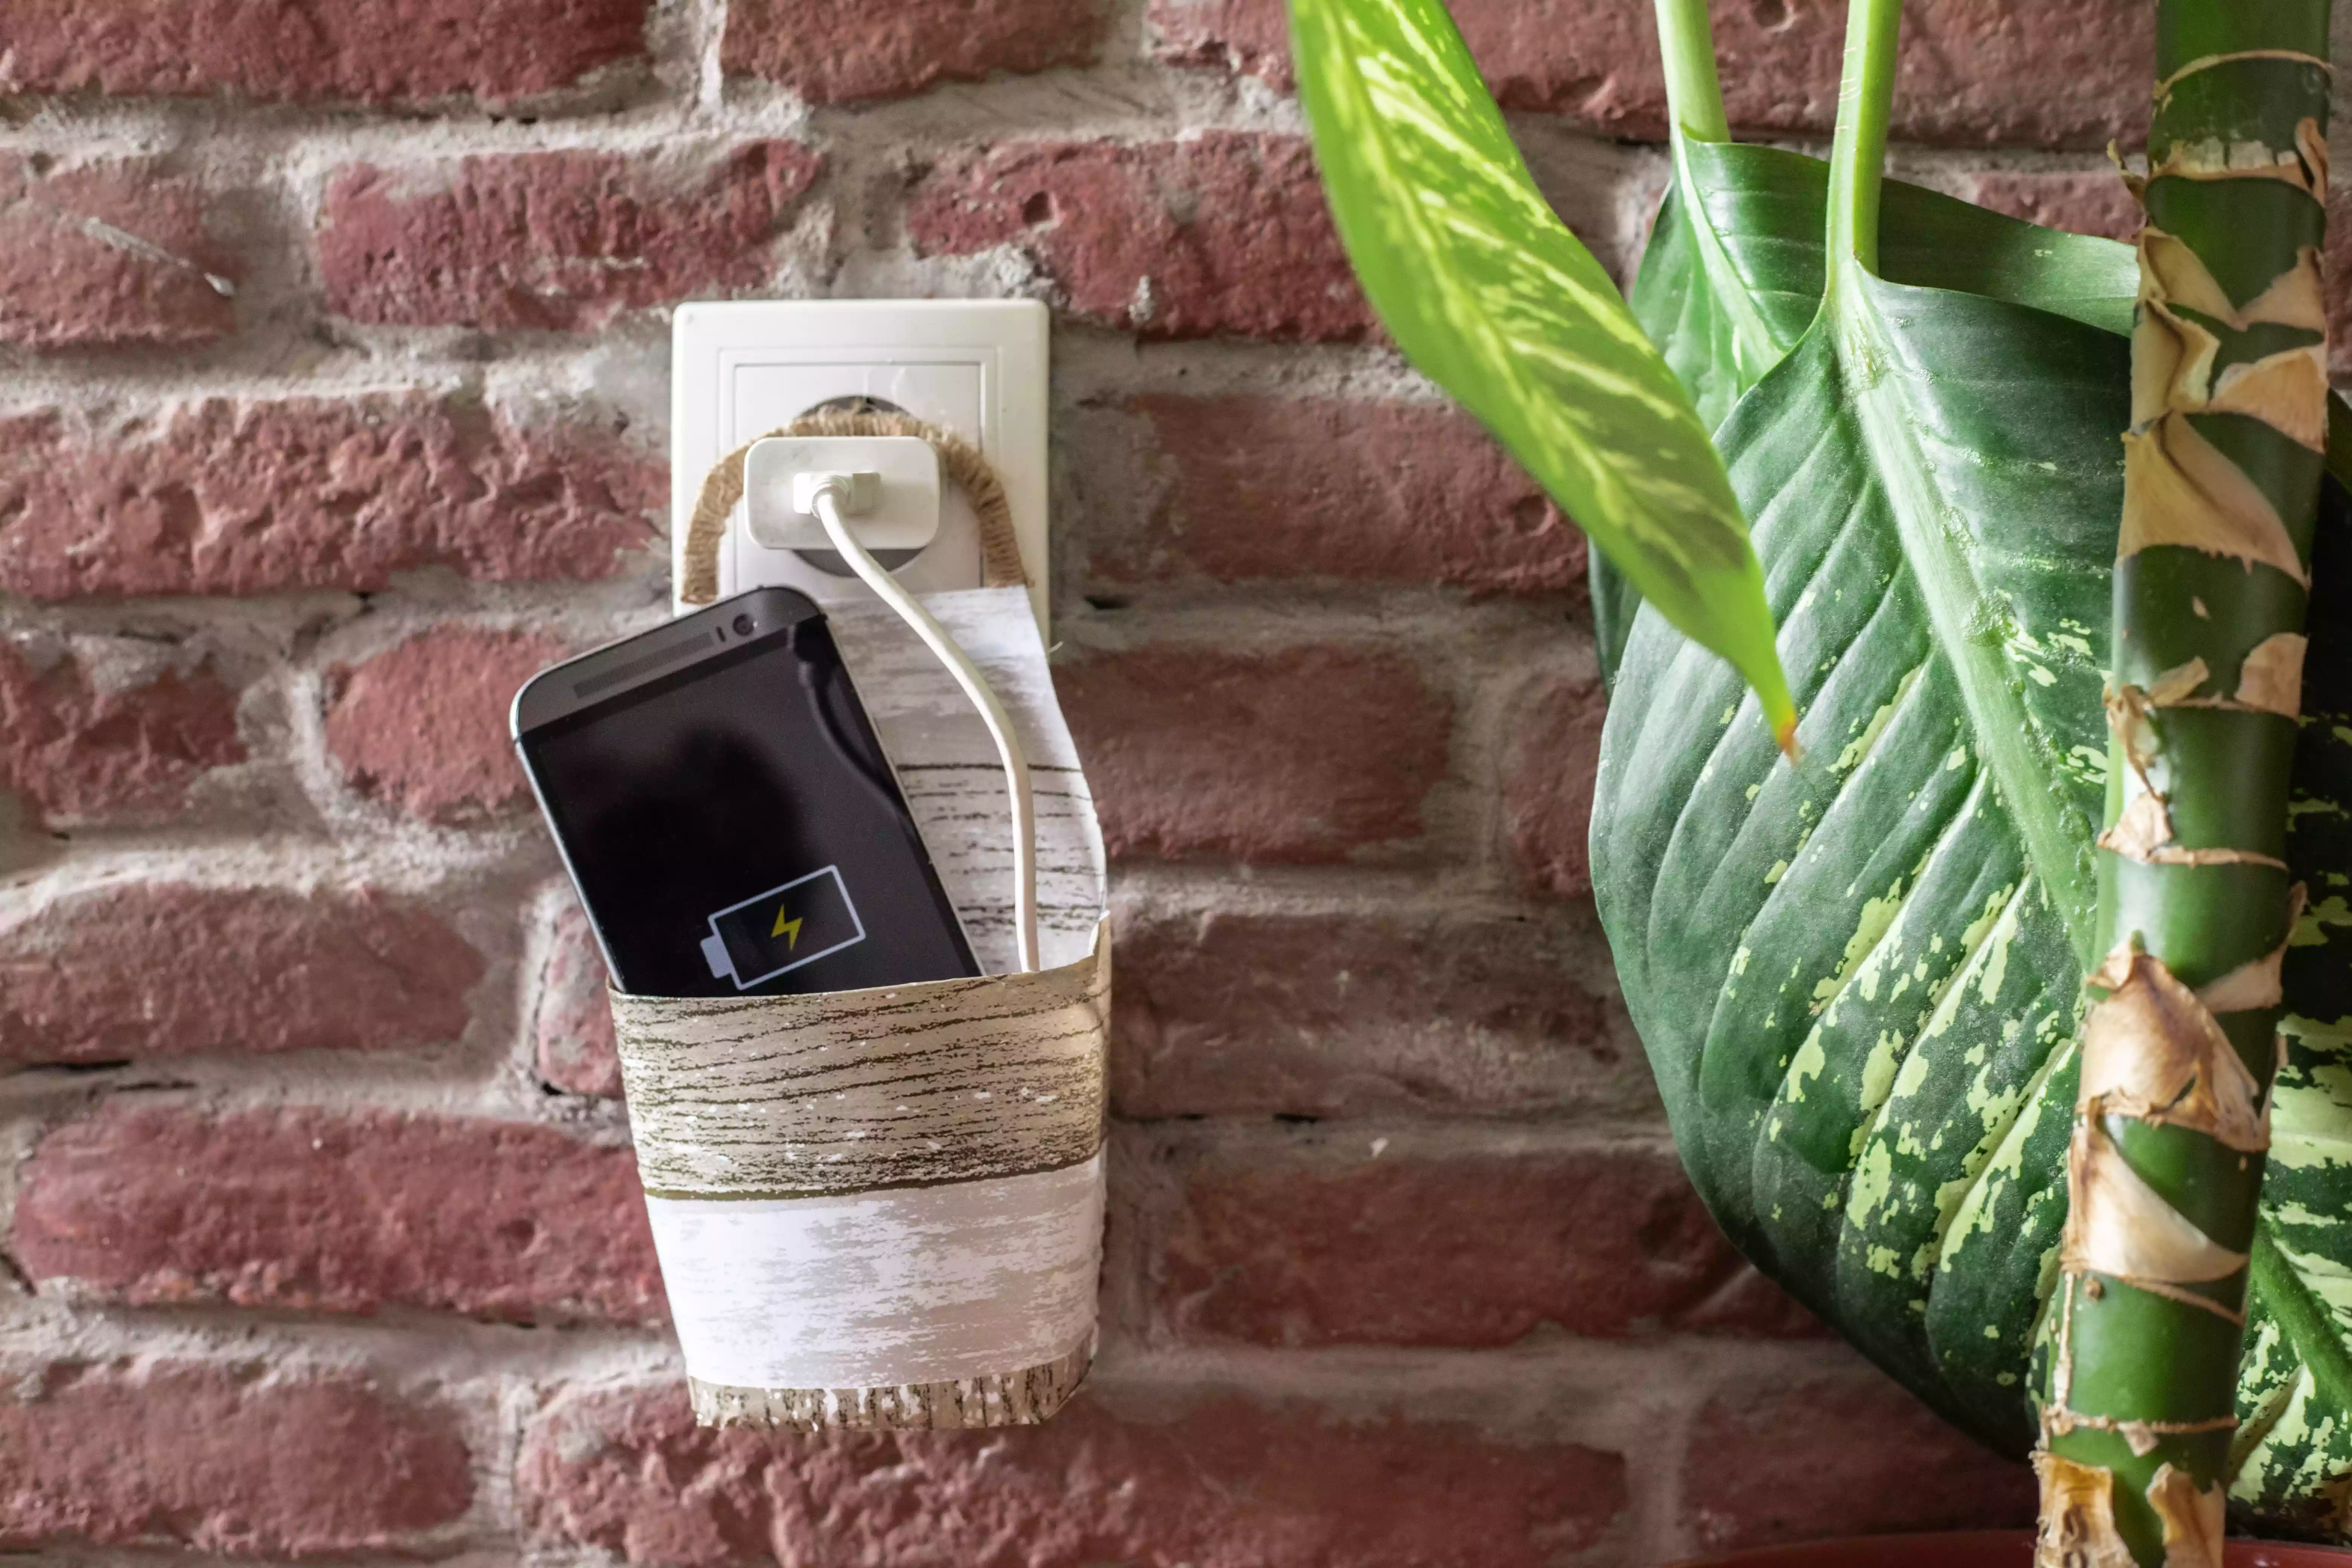 recycled plastic bottle upcycled into cell phone holder for charger